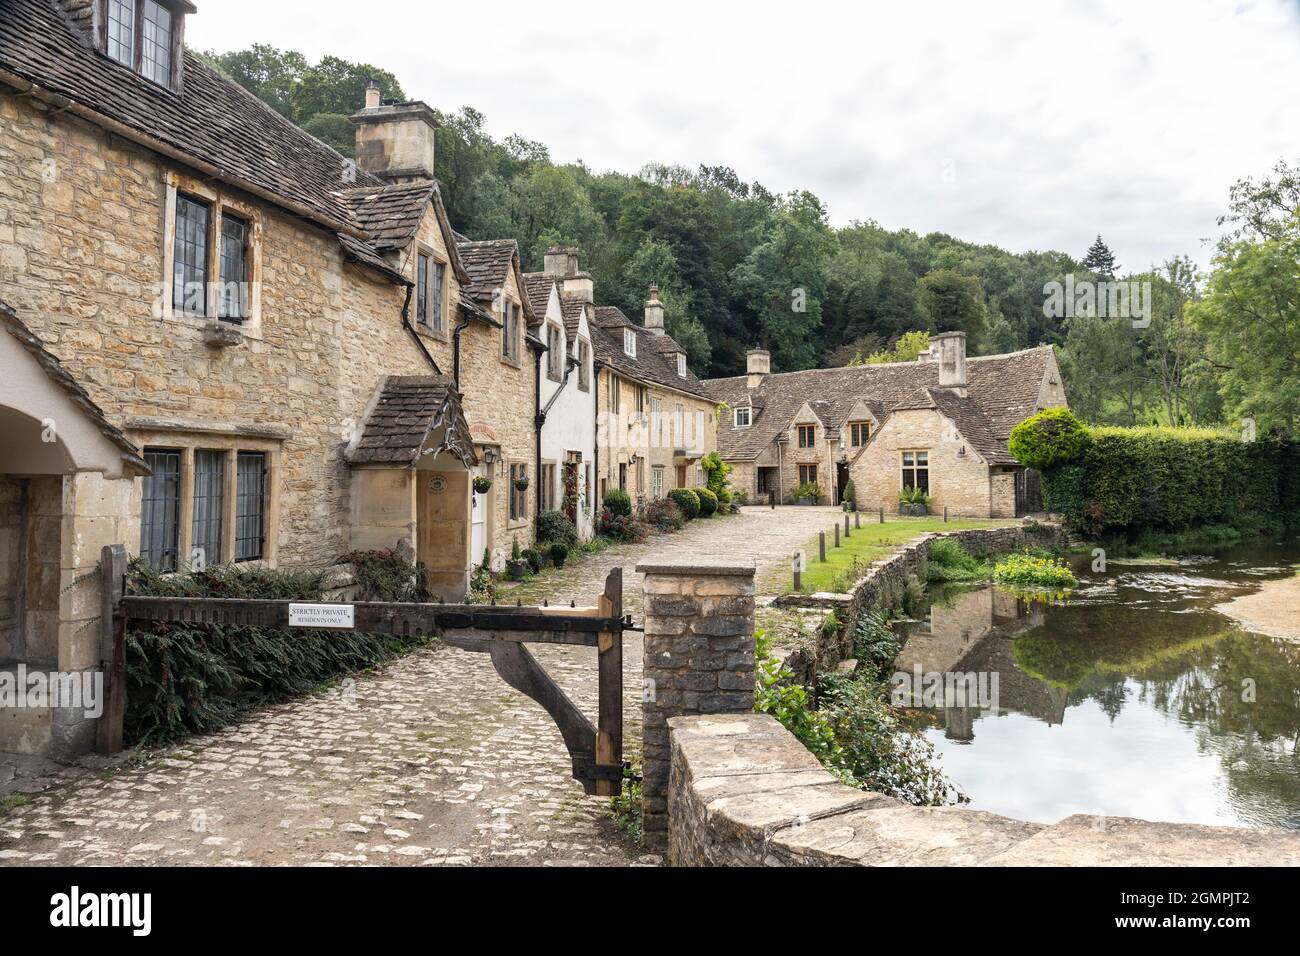 The picturesque traditional stone cottages alongside By Brook river bridge in the unspoilt Cotswold village of Castle Combe, Wiltshire, England, UK Stock Photo